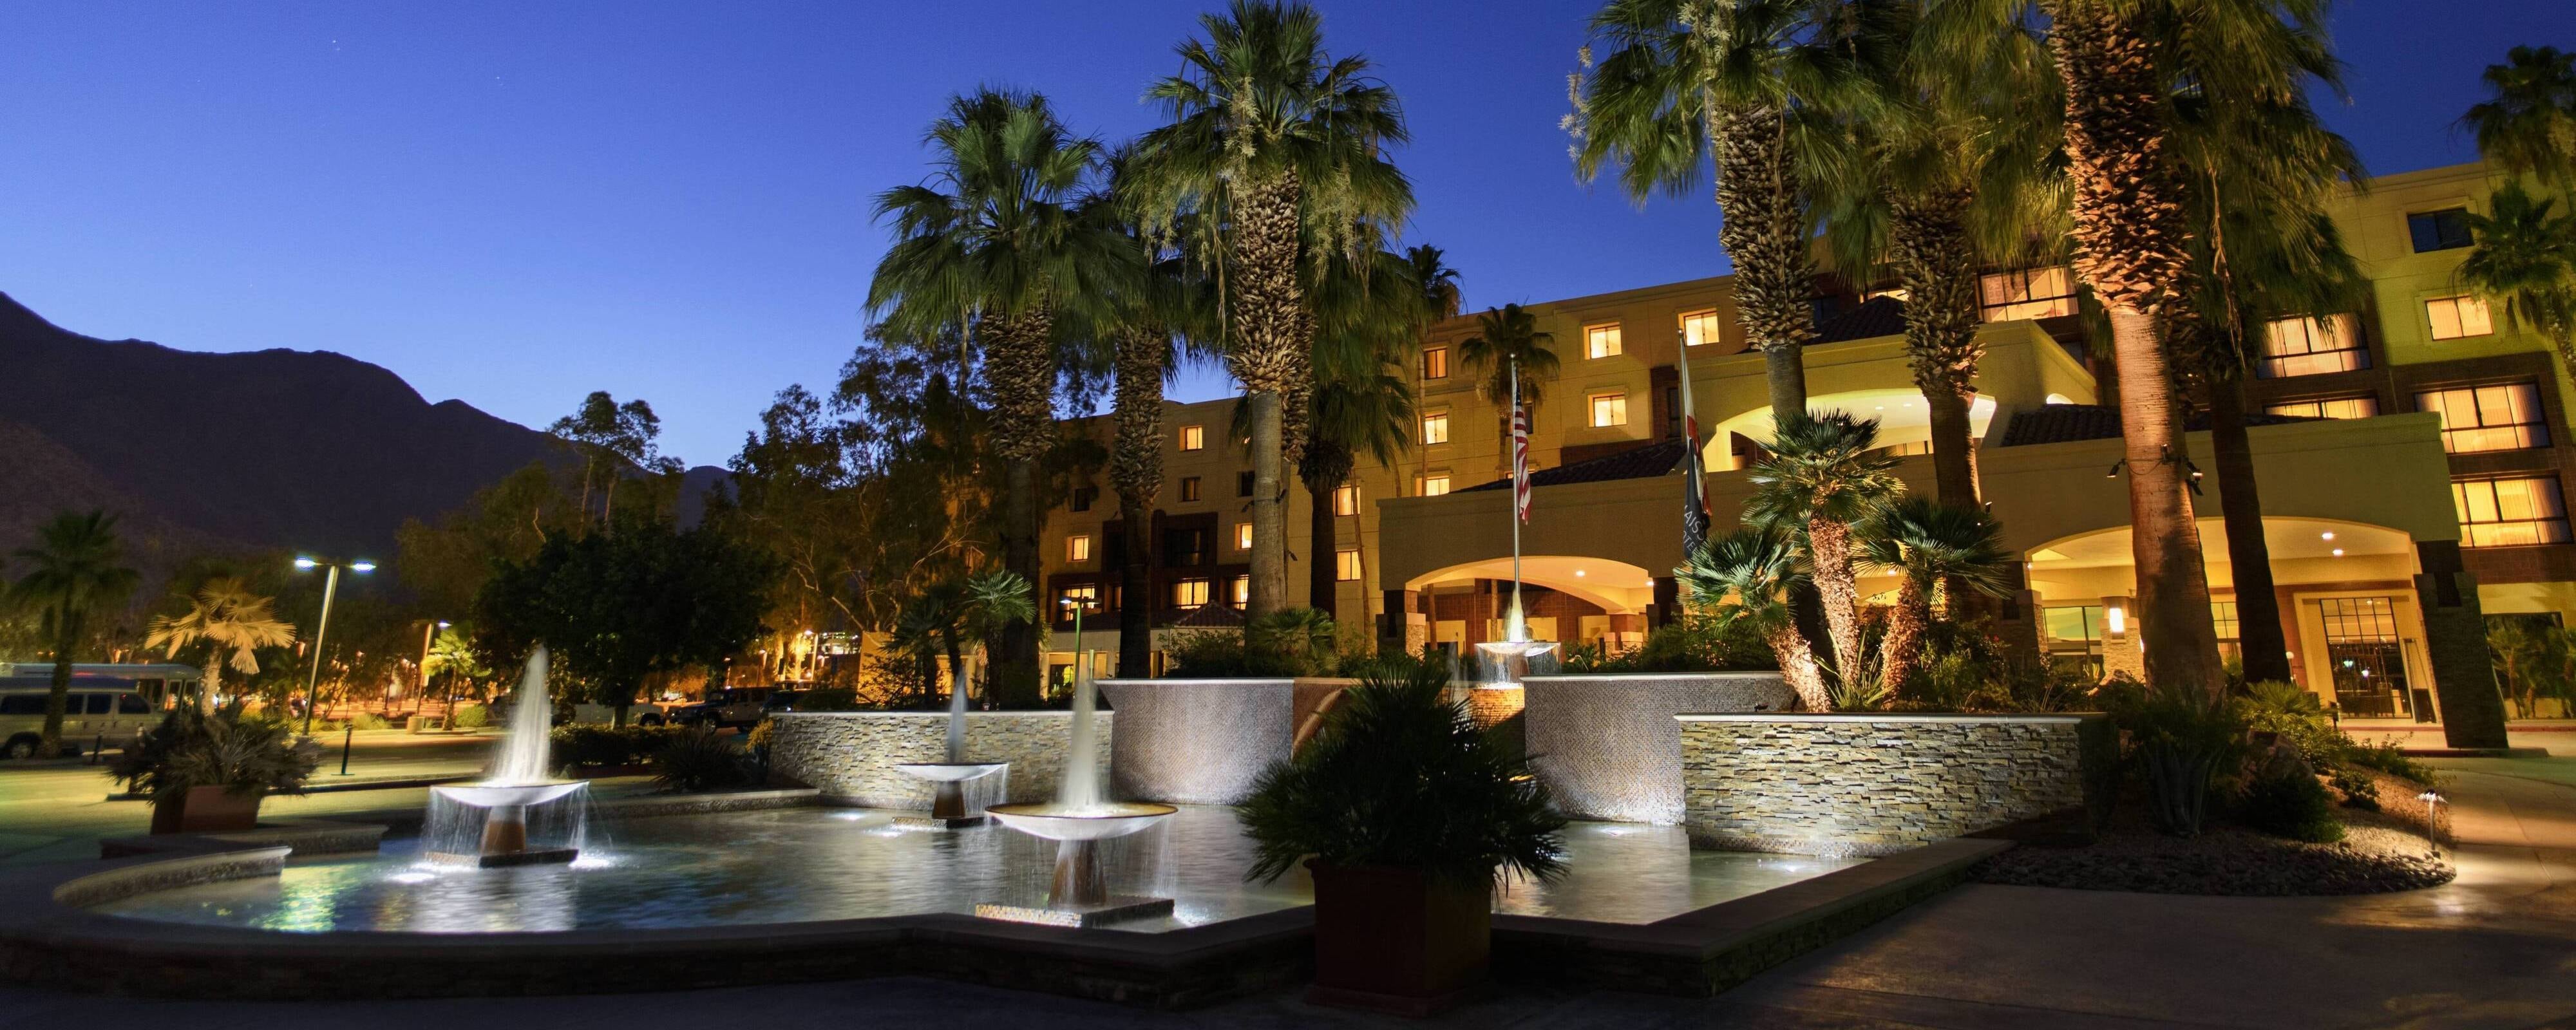 hotels in palm springs